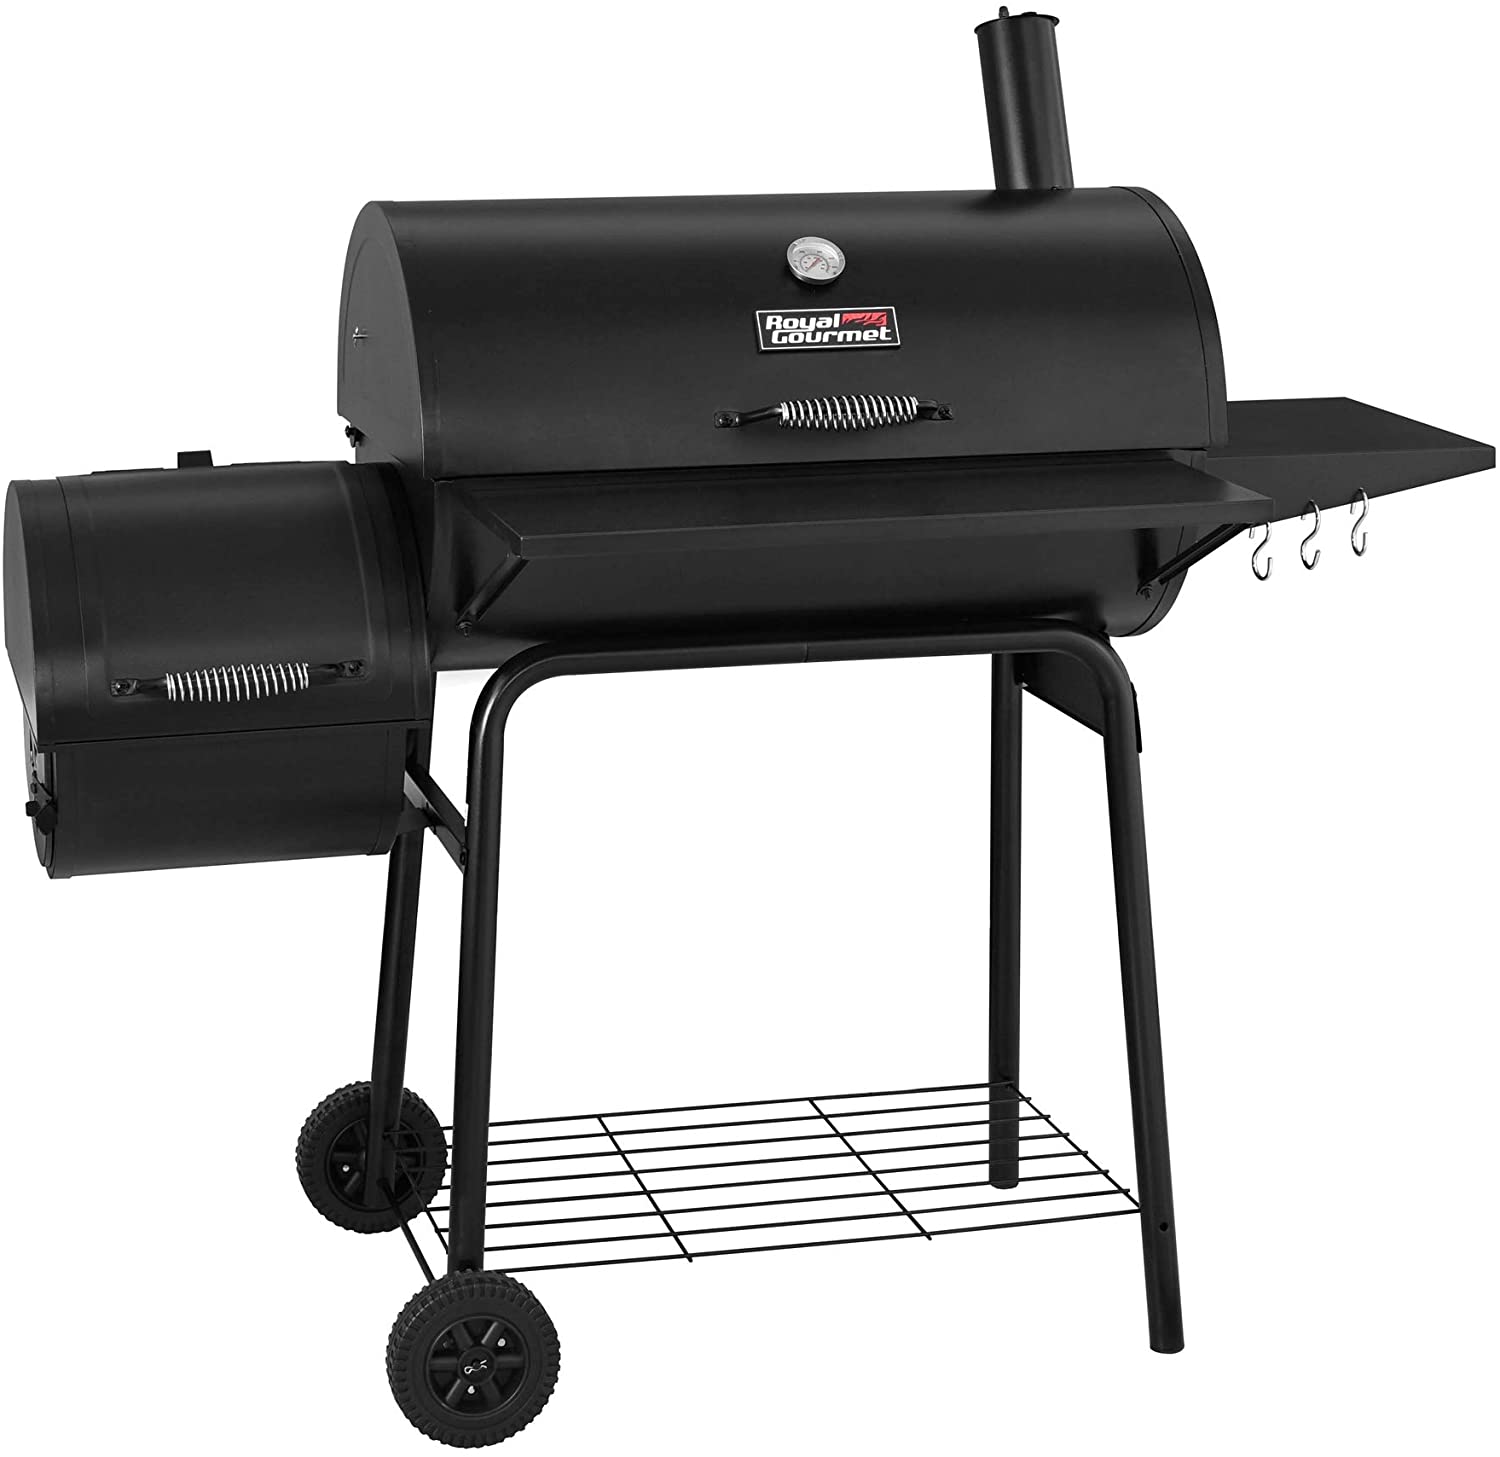 Royal Gourmet CC1830S Adjustable Charcoal Grill, 30-Inch